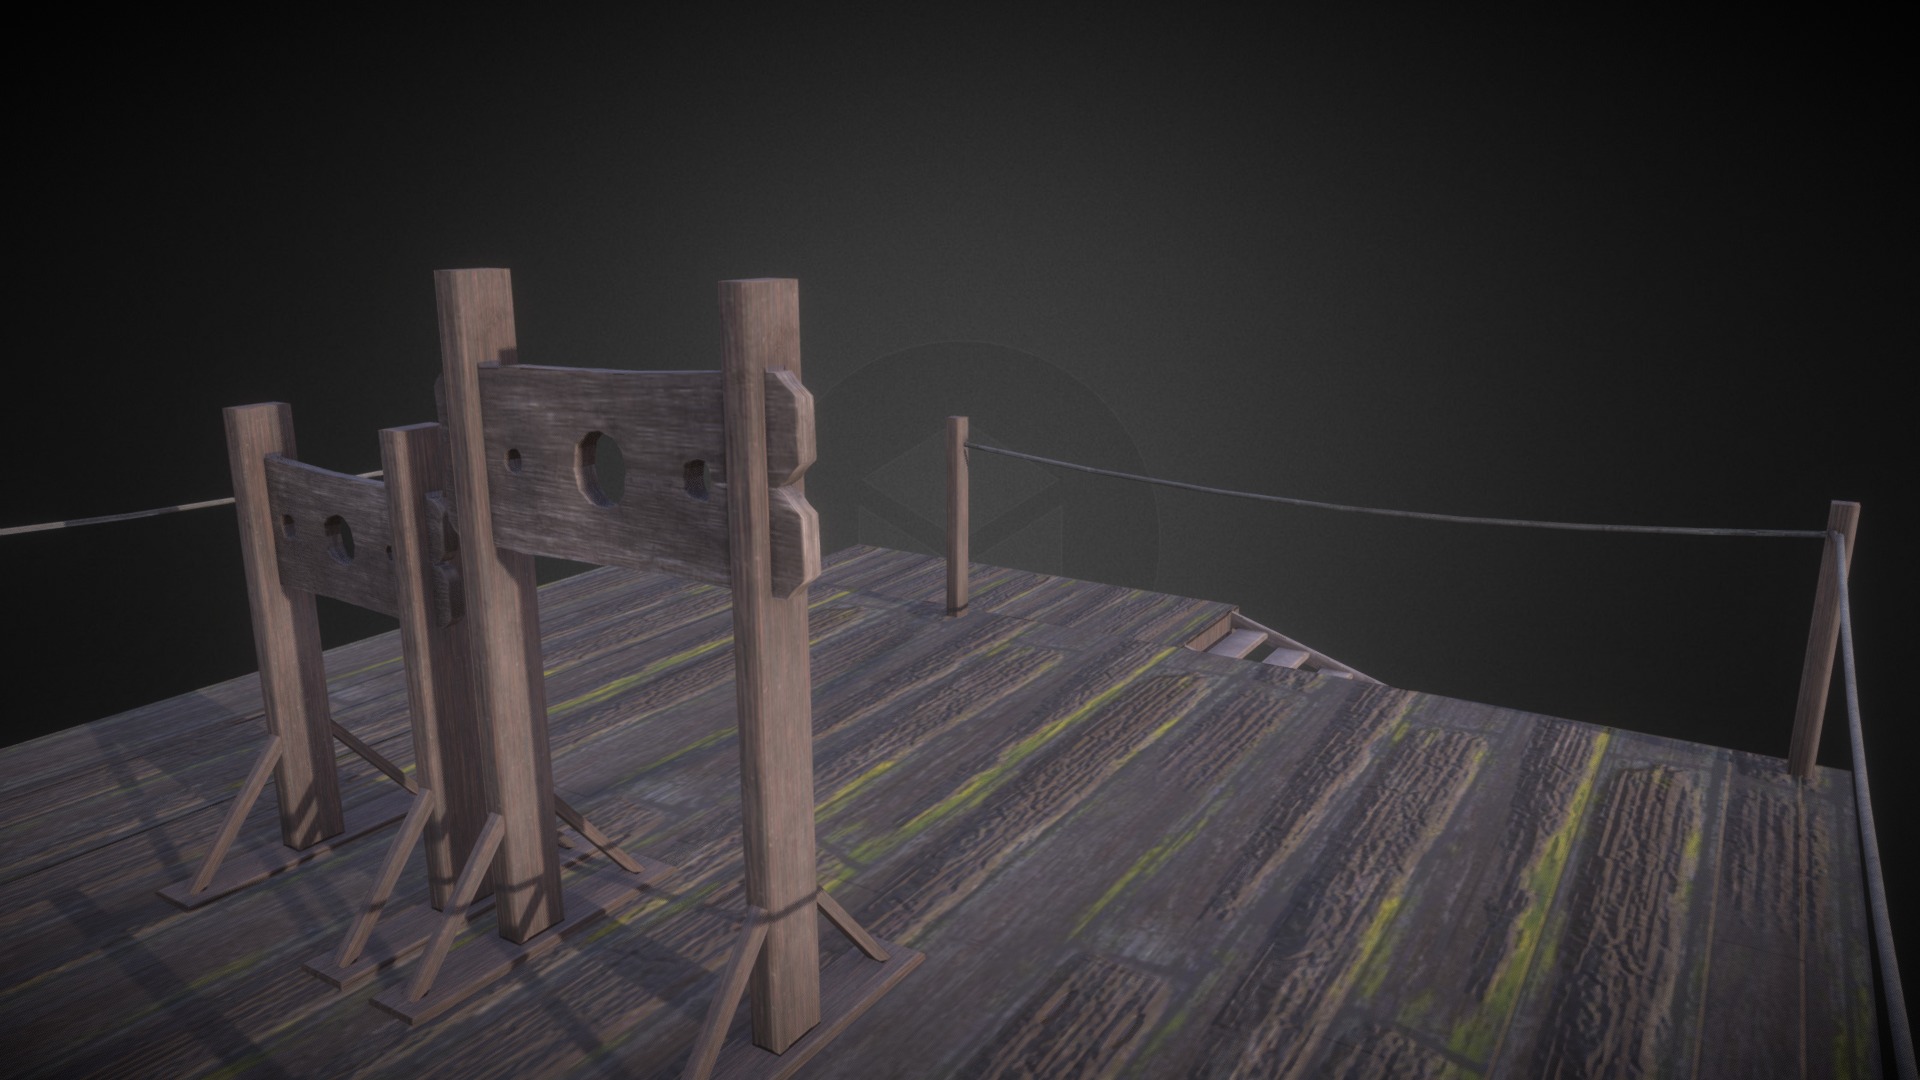 3D model wood pillory - This is a 3D model of the wood pillory. The 3D model is about a wooden structure on a dock.